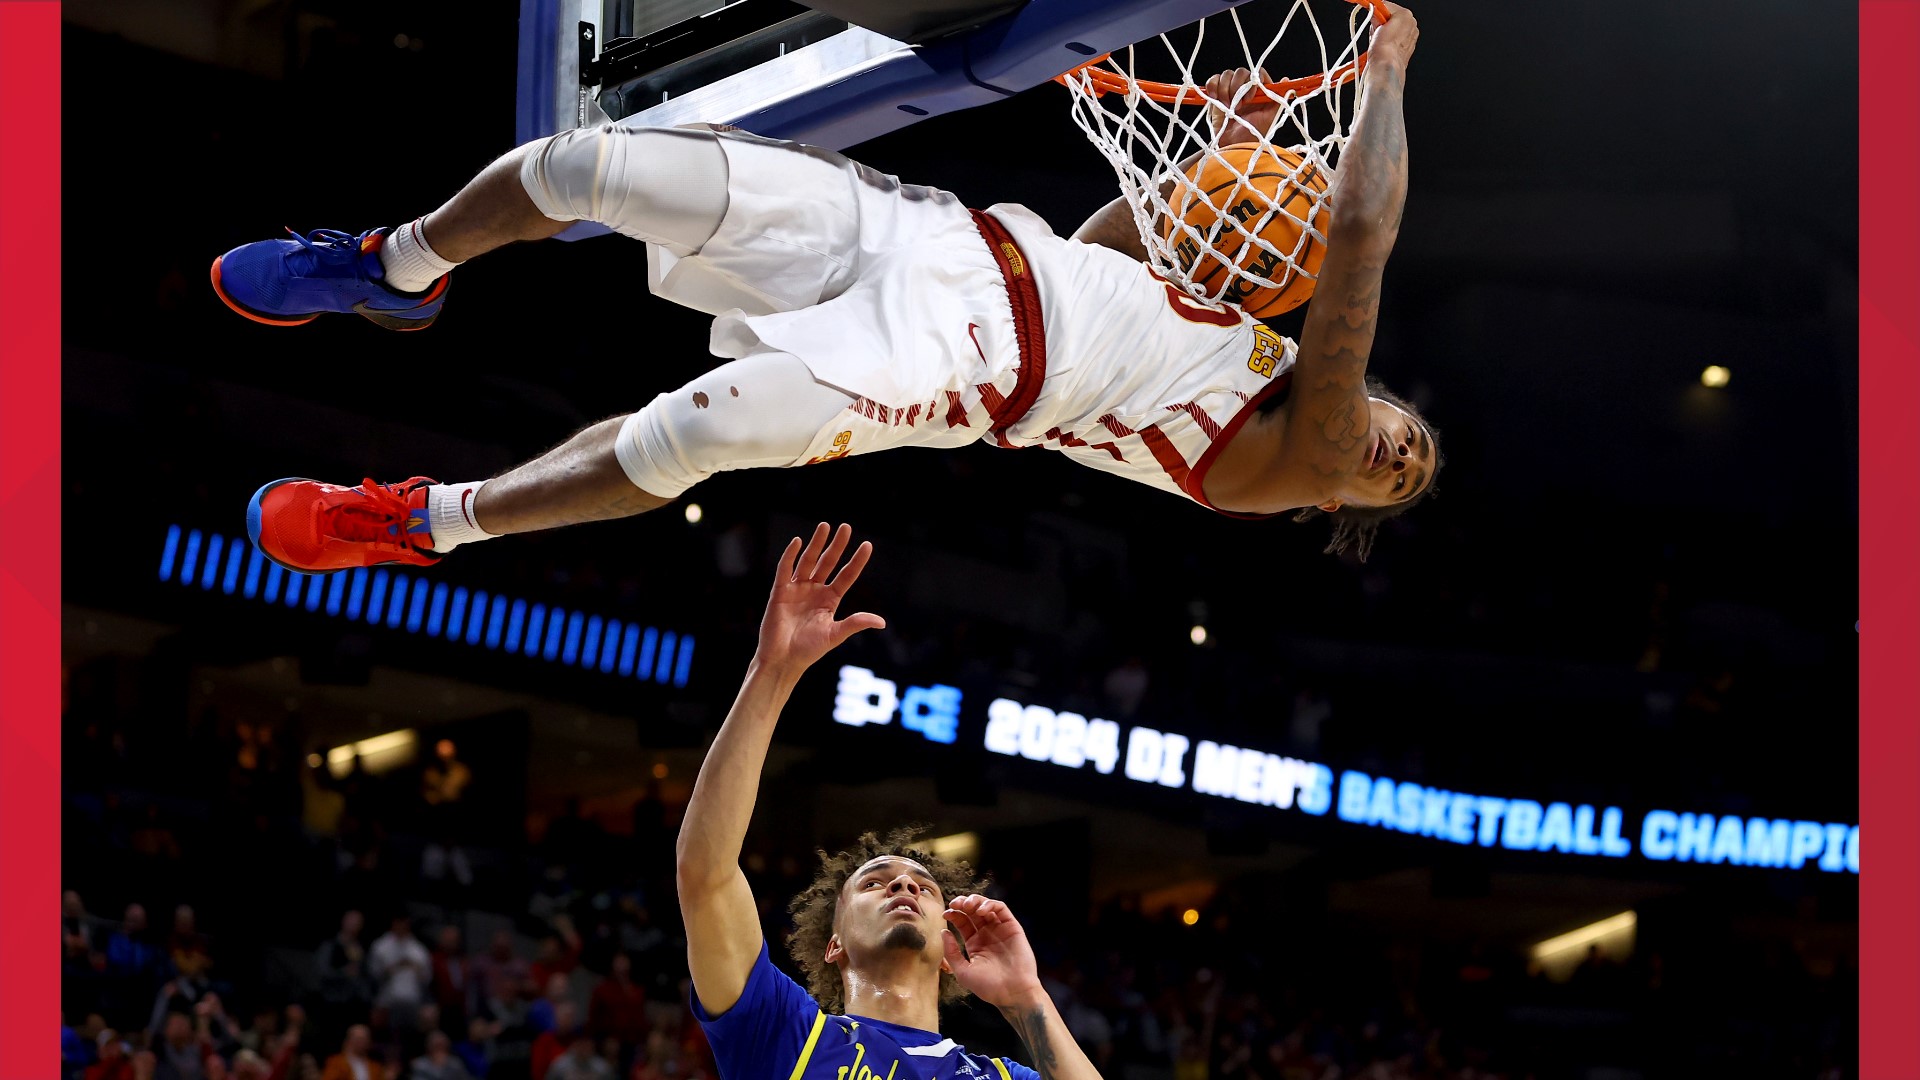 No. 2 Iowa State used big runs to start each half to beat No. 15 seed South Dakota State 82-65 on Thursday night in the NCAA Tournament.